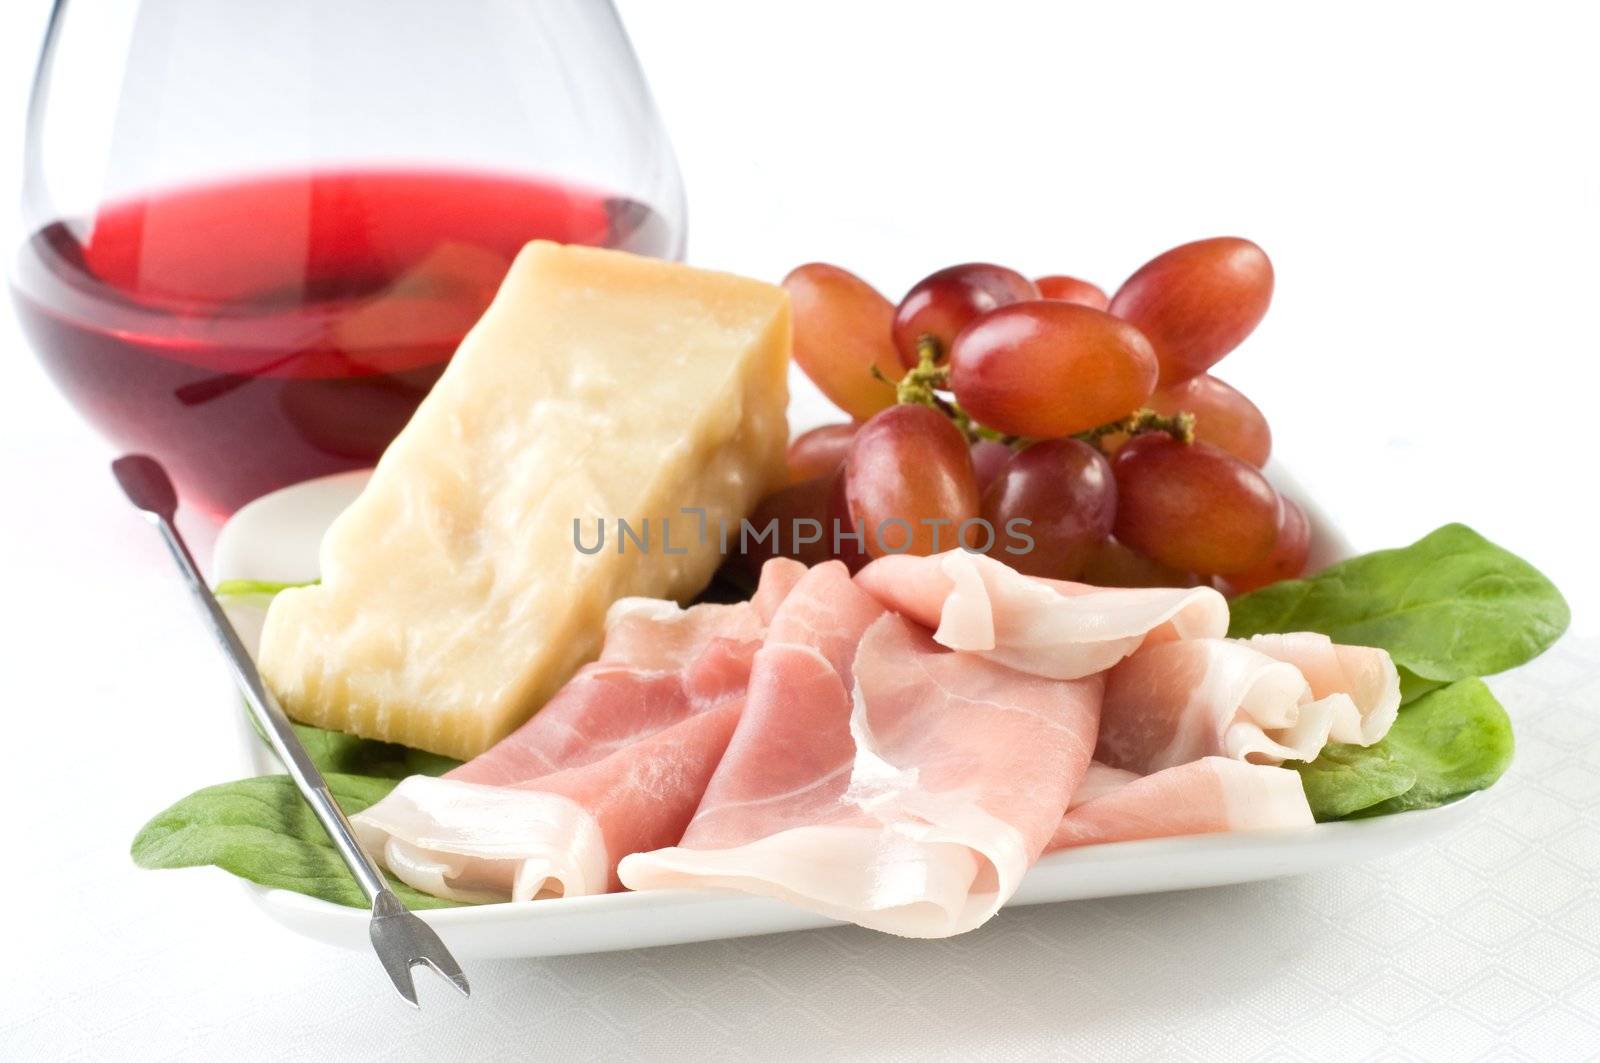 Italian appetizer plate of cheese, grapes and ham.